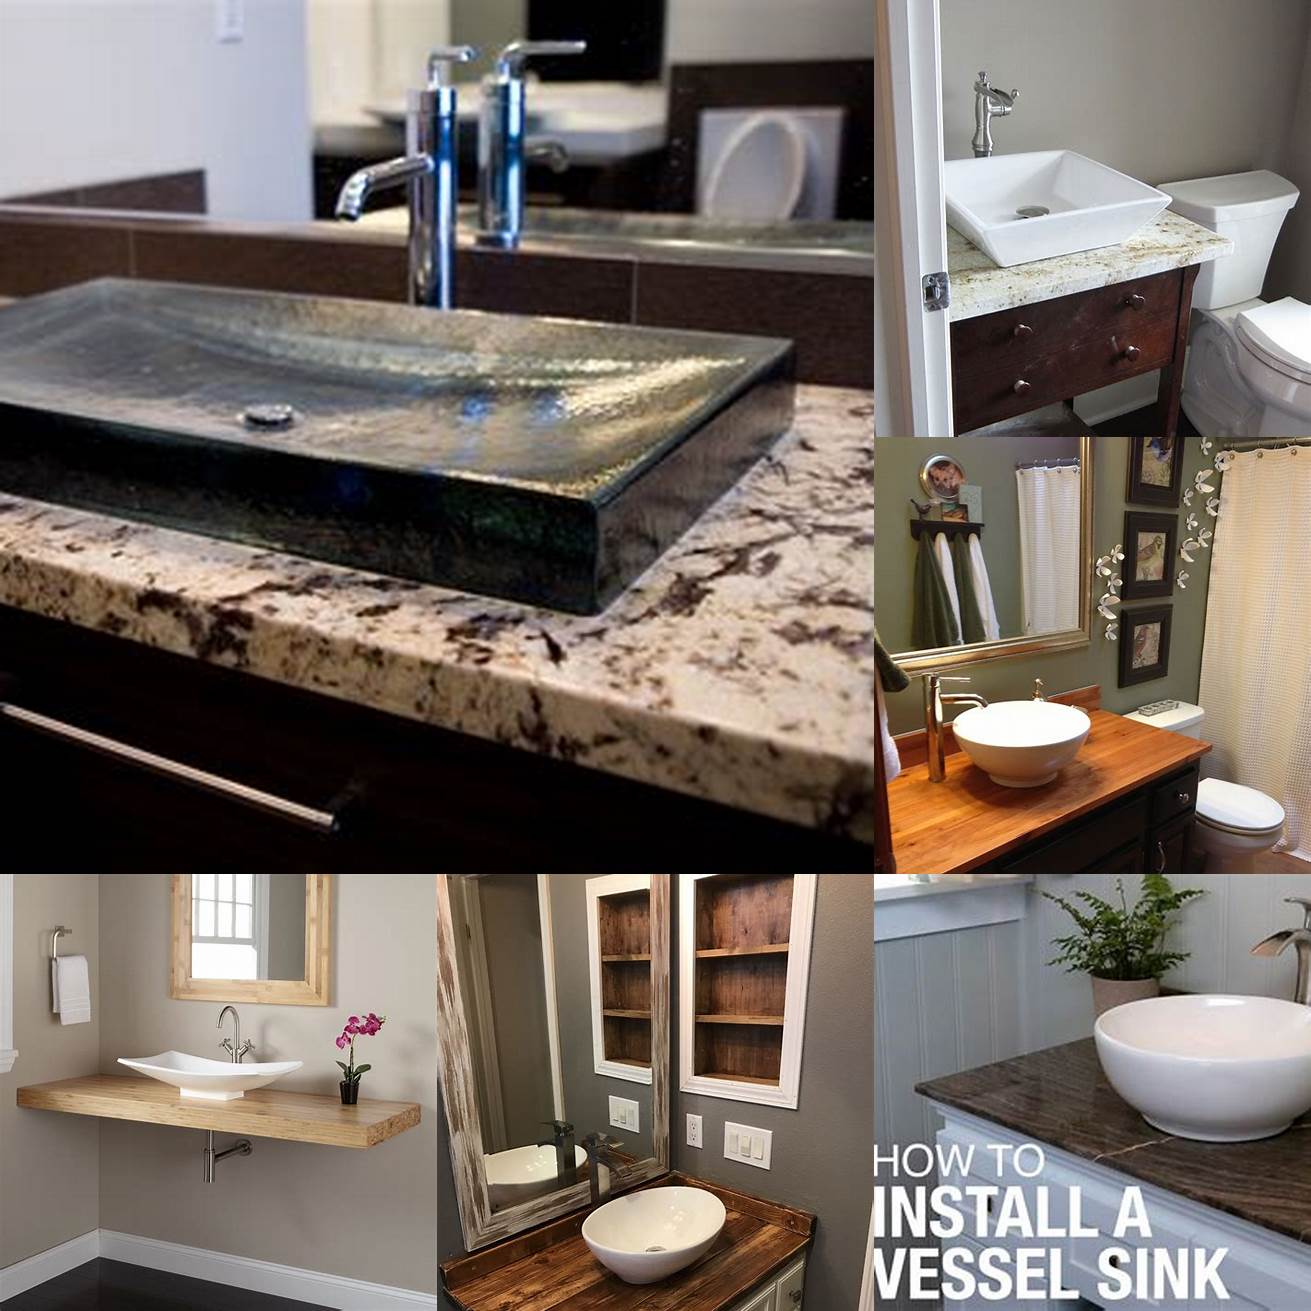 A vessel sink sits on top of the countertop making it easy to install and maintain